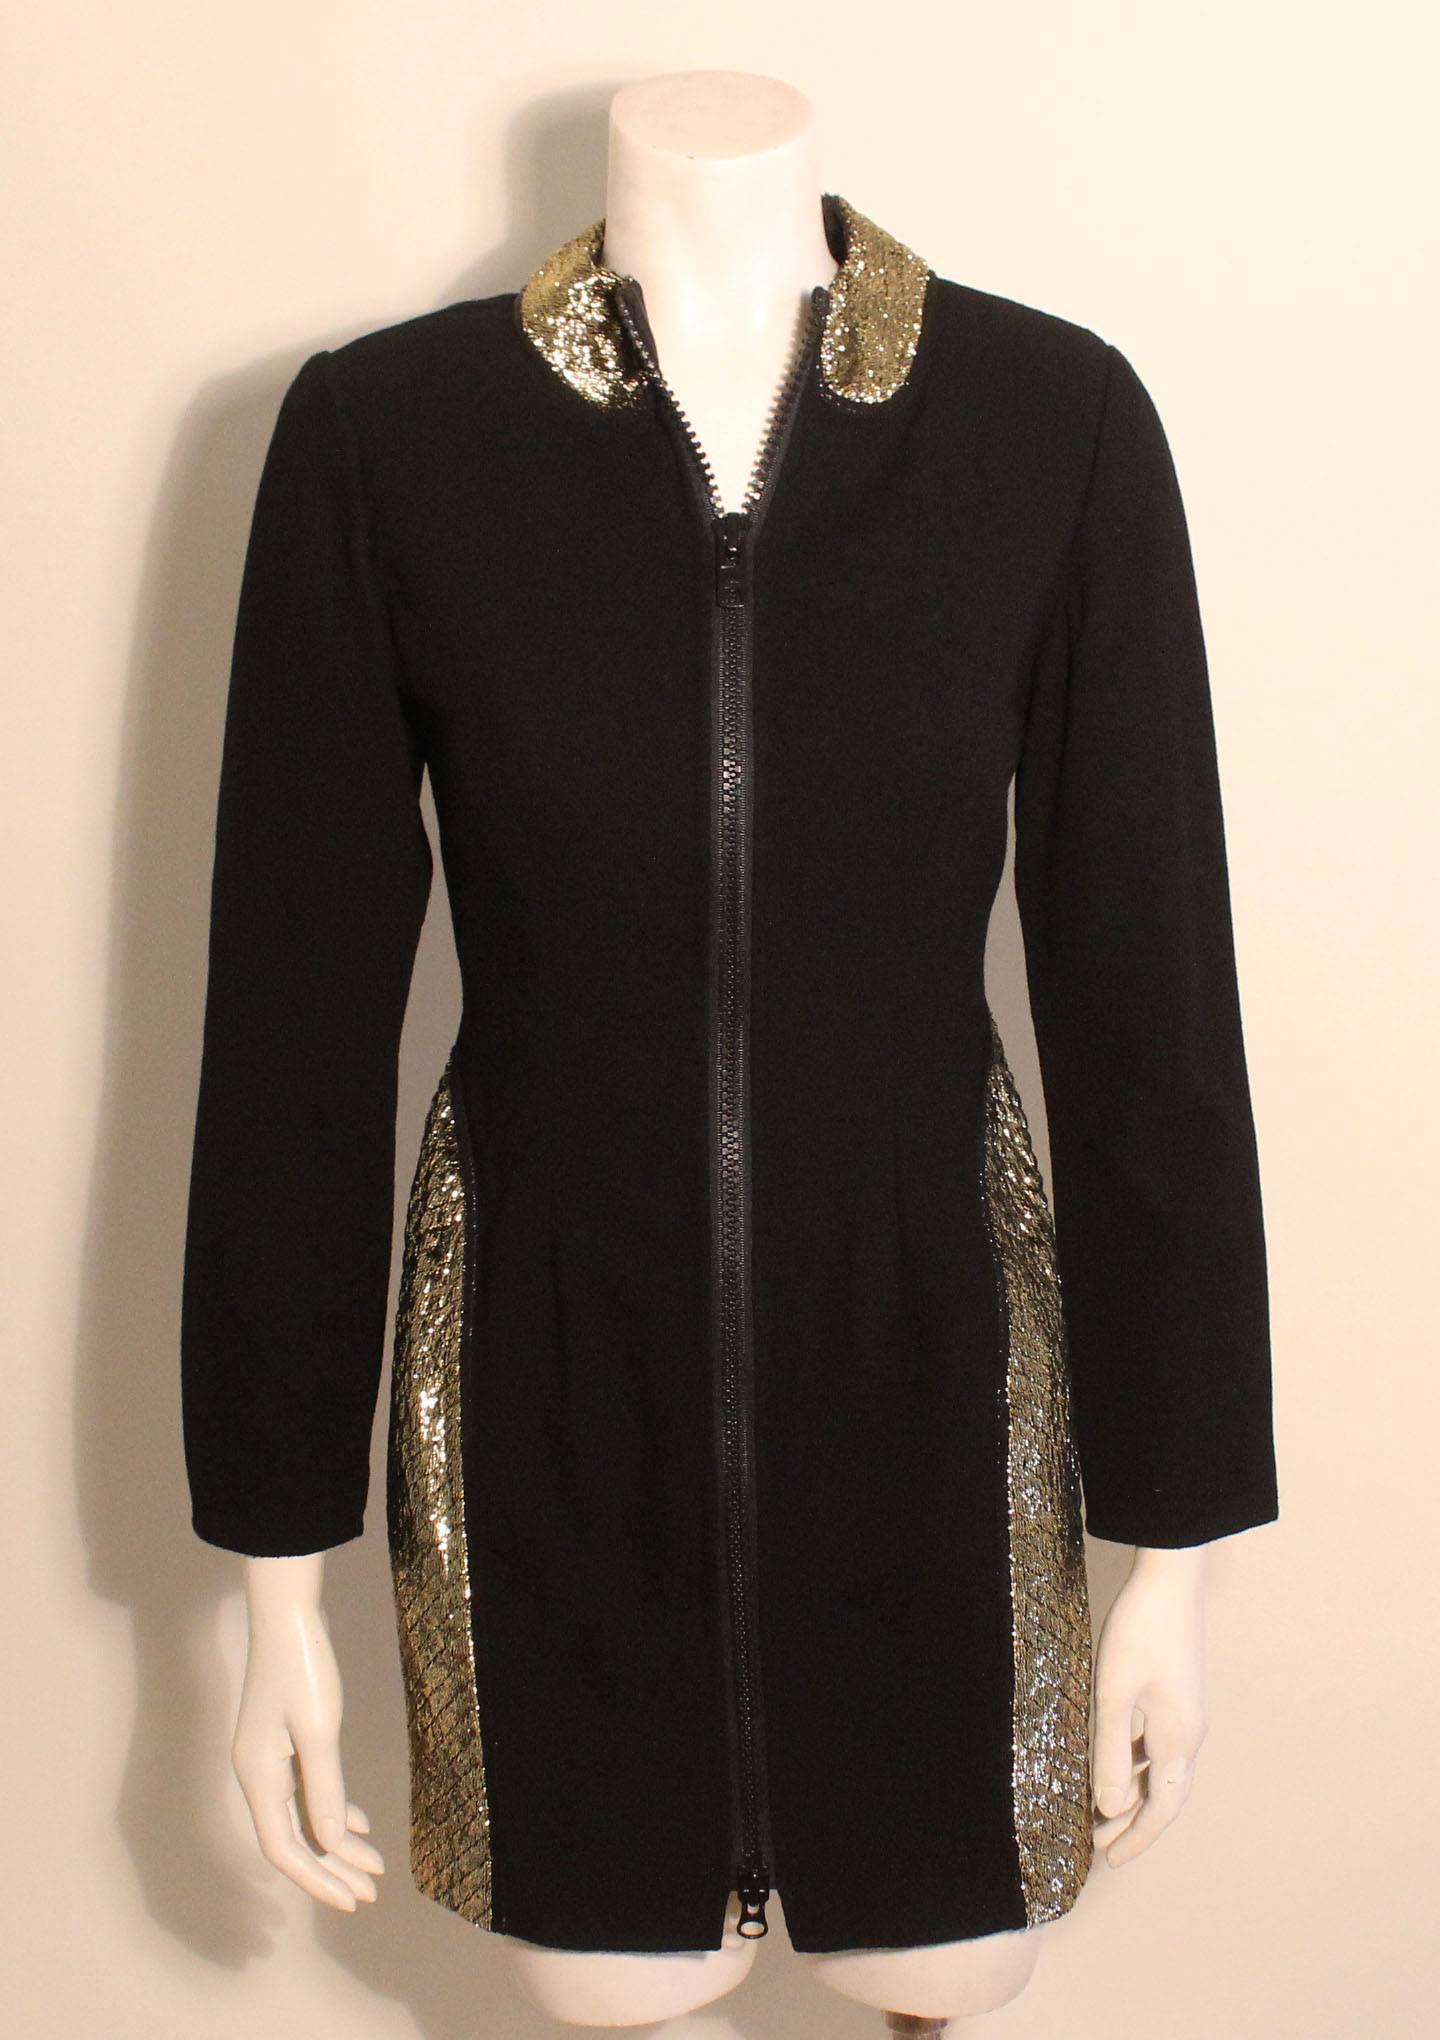 This Geoffrey Beene dress is a perfect example of his designs that often combined sporty elements with luxe fabrics. The tunic/dress is of a fine wool knit fabric with inserts of a gold quilted metallic. There is a zipper running the length of the